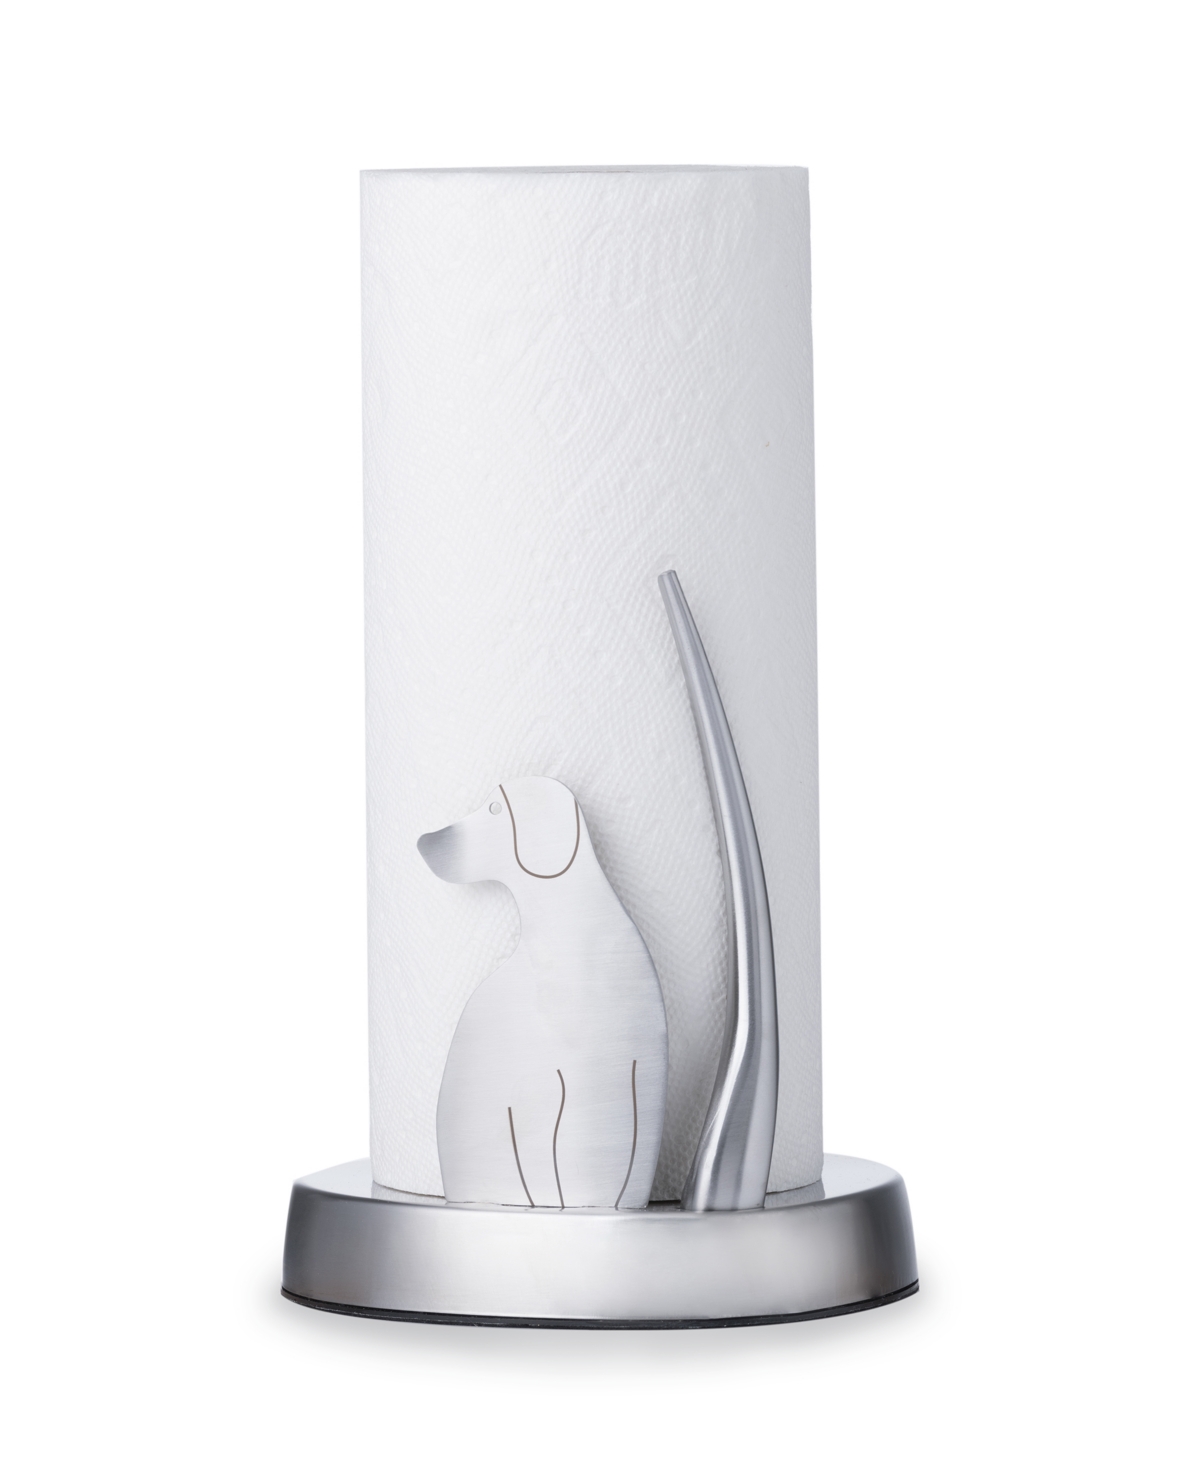 Everyday Solutions Woof Small Size Paper Towel Holder In Silver-tone